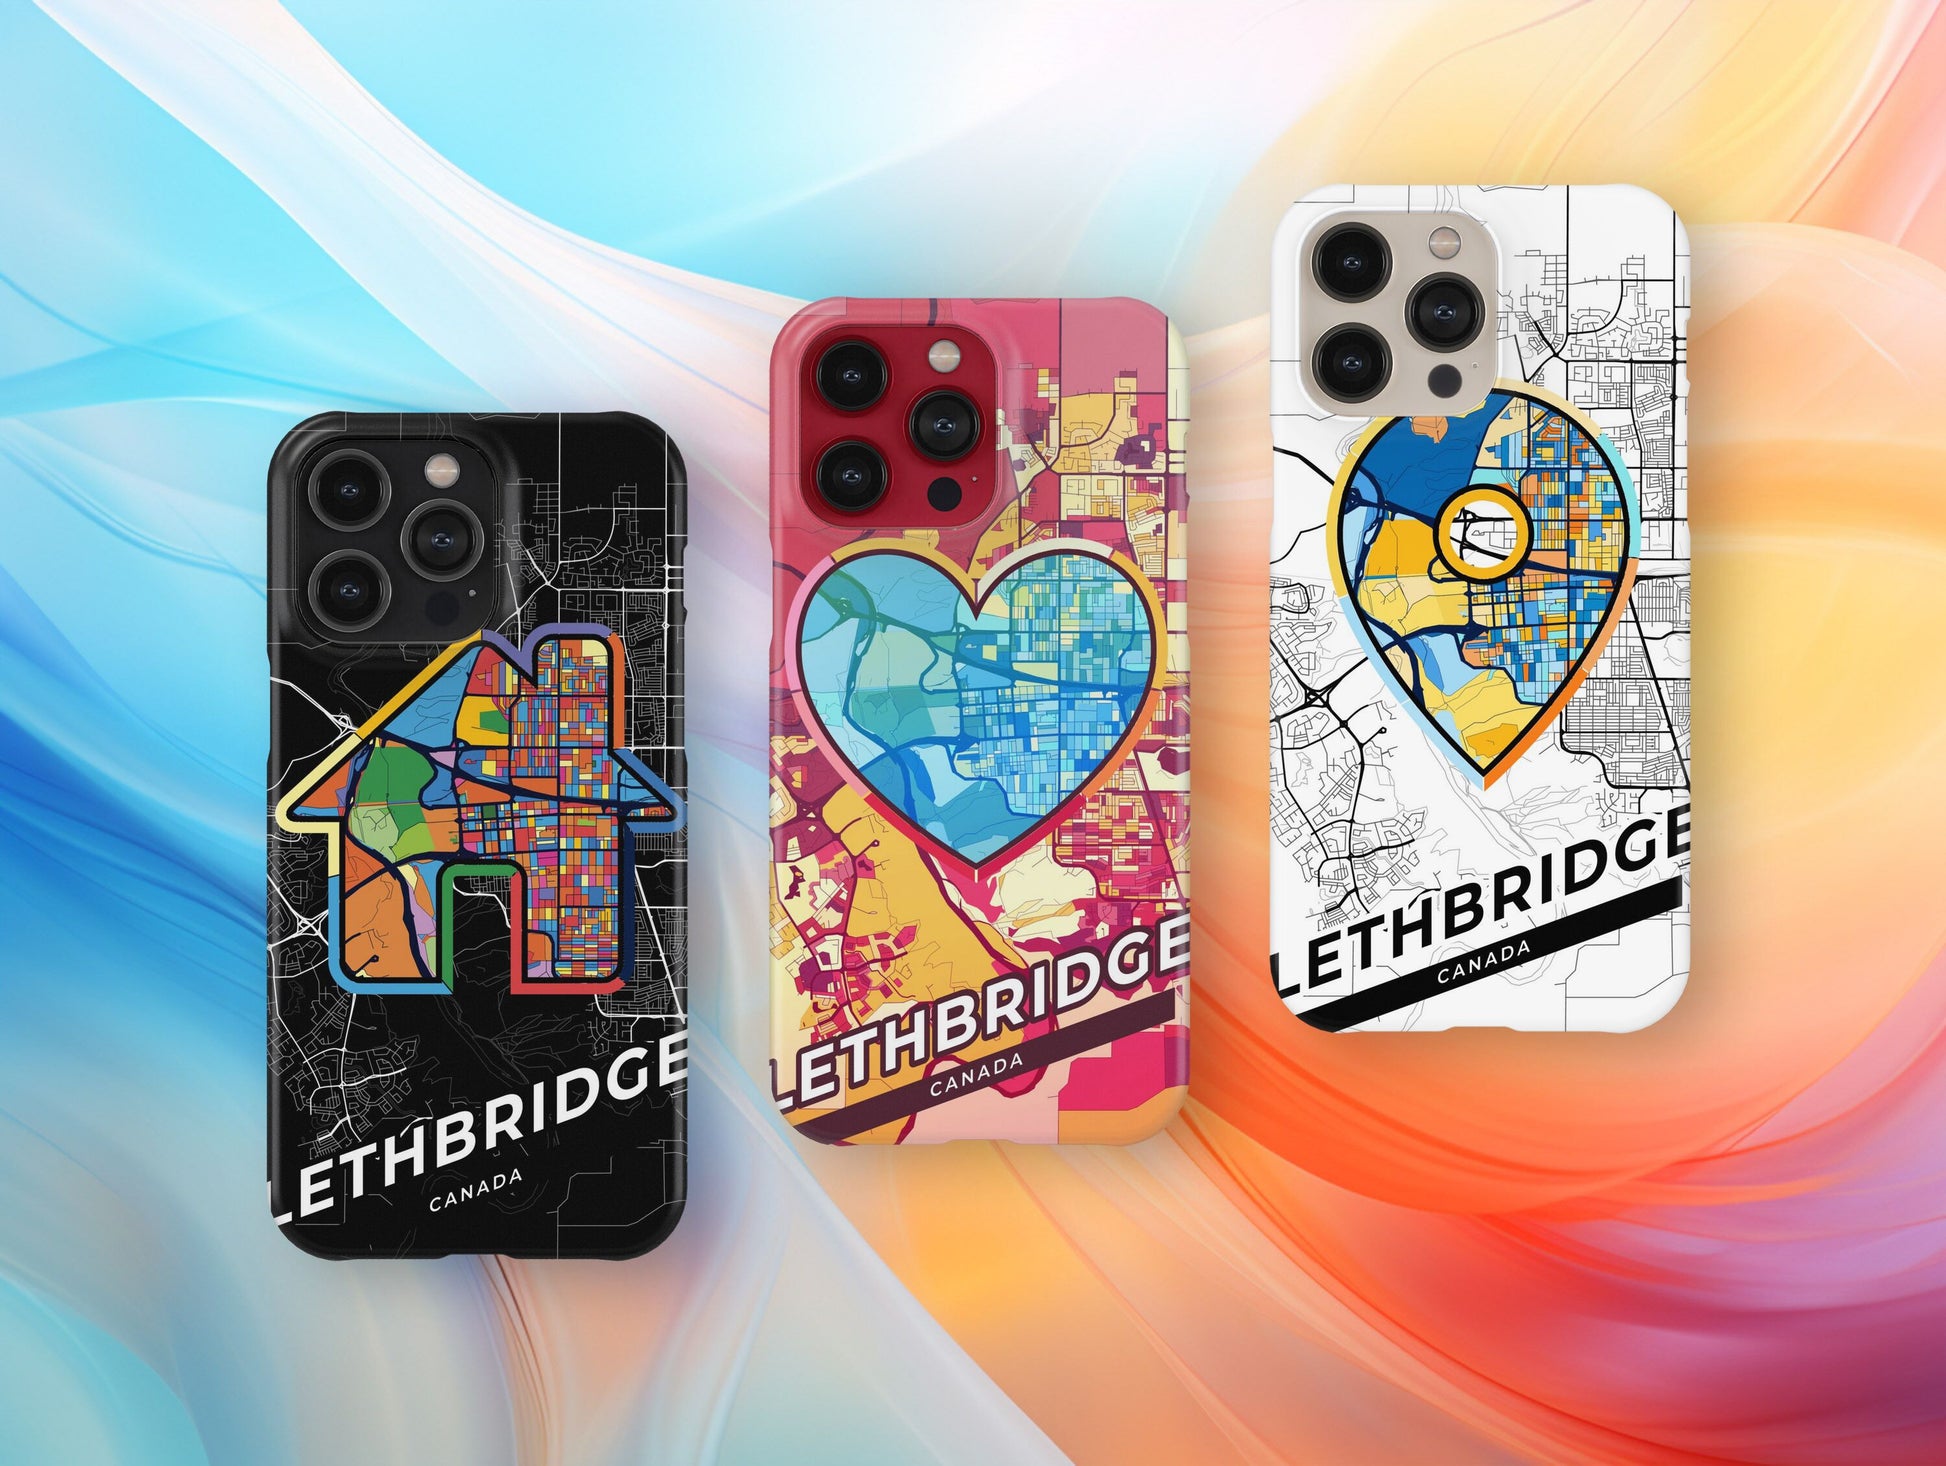 Lethbridge Canada slim phone case with colorful icon. Birthday, wedding or housewarming gift. Couple match cases.